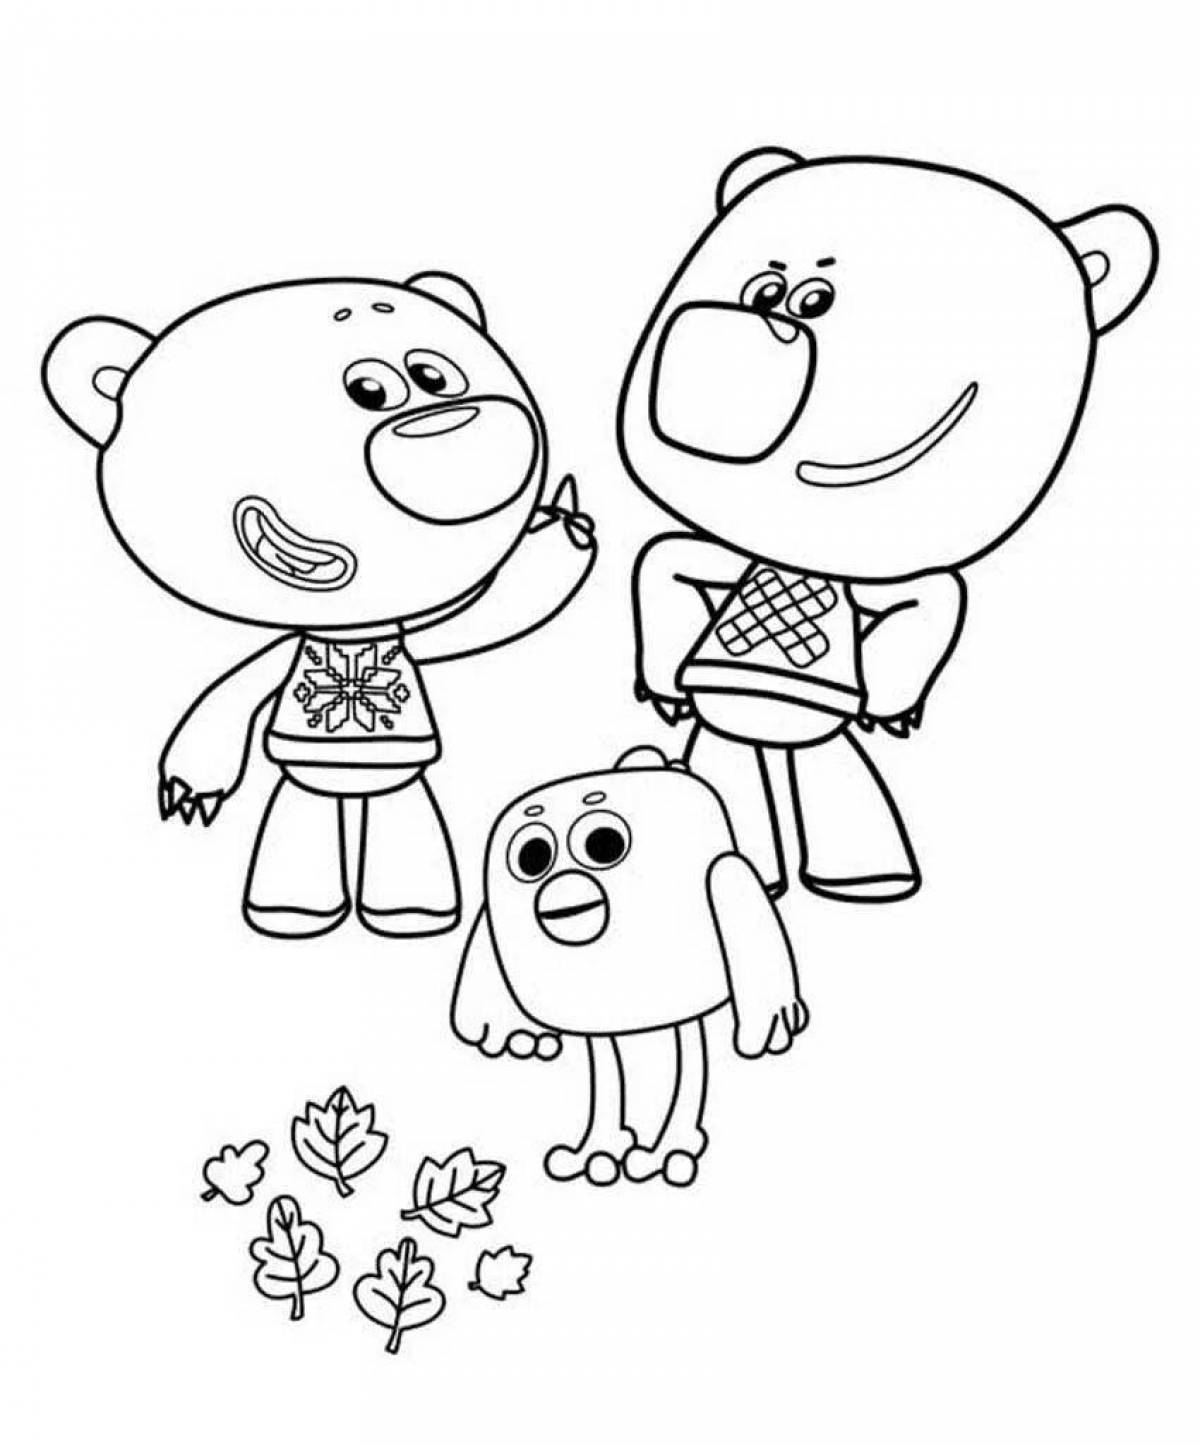 Glowing Mimi Bear coloring page